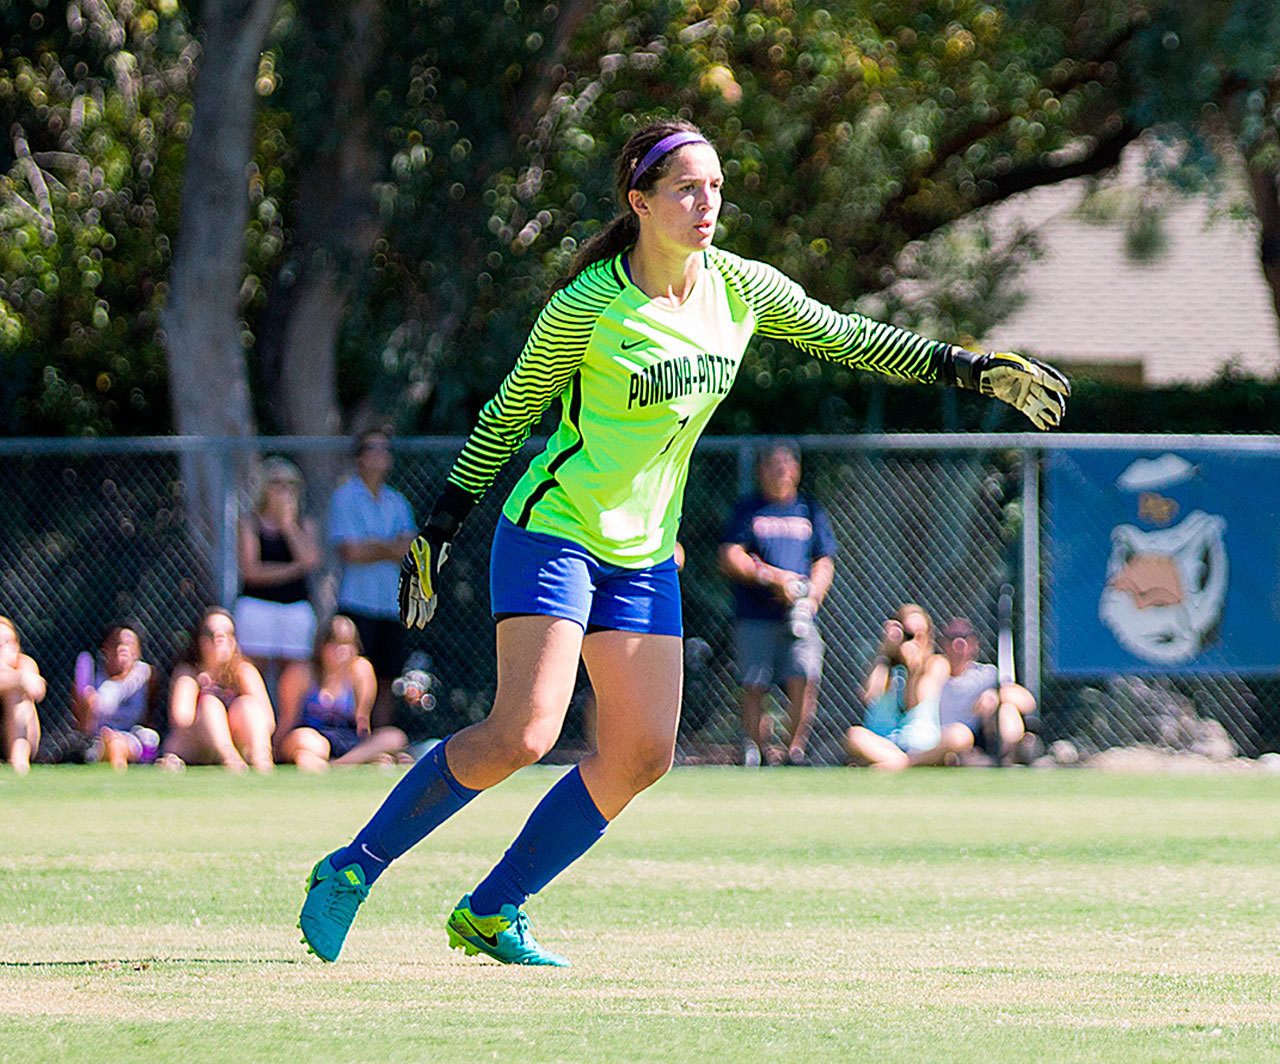 Pomona-Pitzer starting goalkeeper Corey Goelz helped the Sagehens advance to the NCAA Div. III women’s soccer tournament for only the third time in program history this year. Contributed photo.